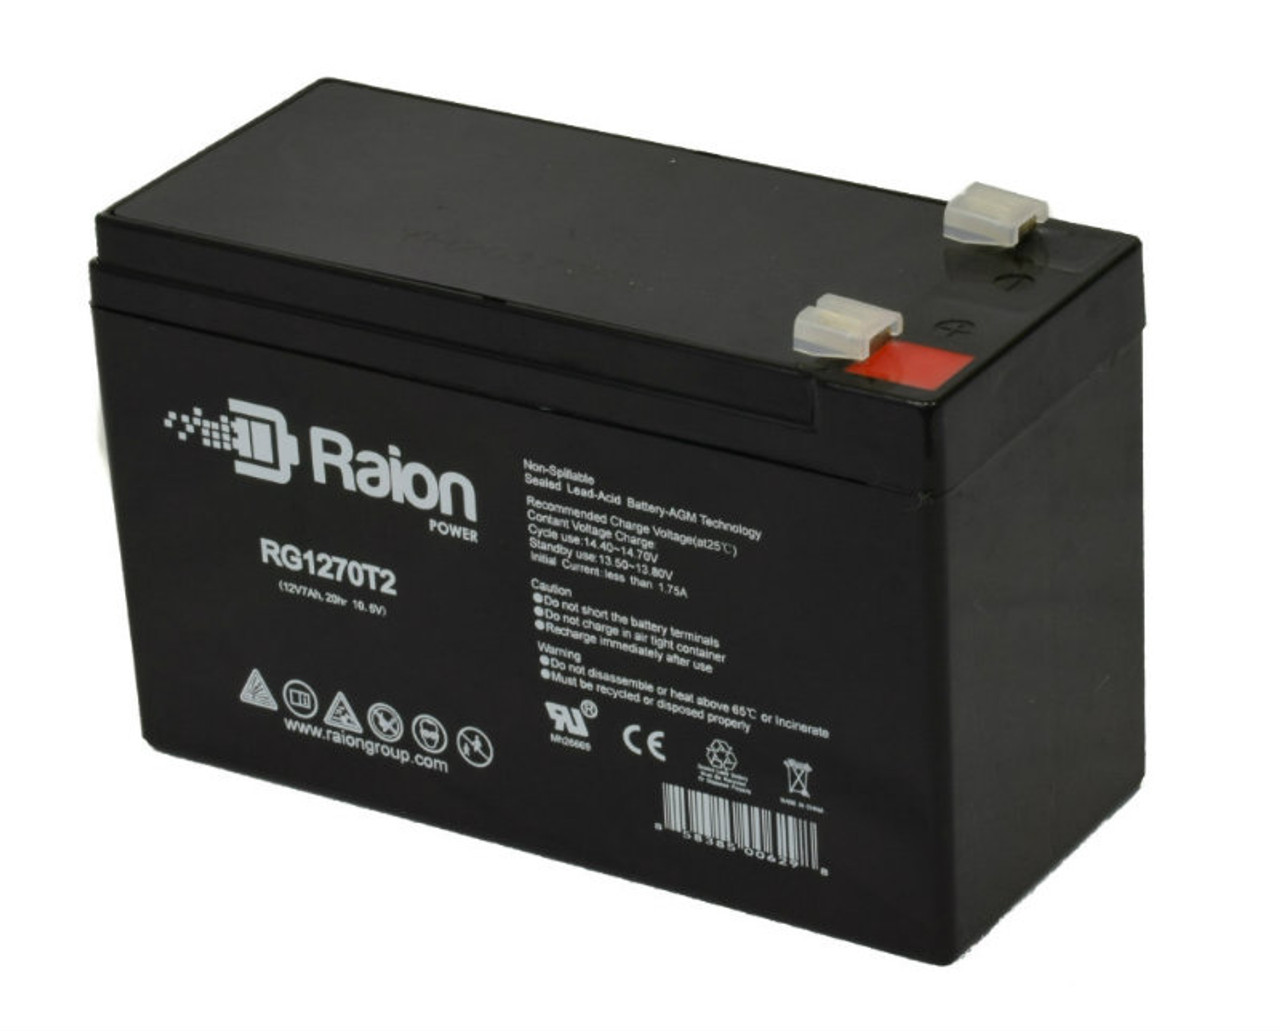 Raion Power Replacement 12V 7Ah RG1270T1 Fire Alarm Battery for ADT Security Alarm